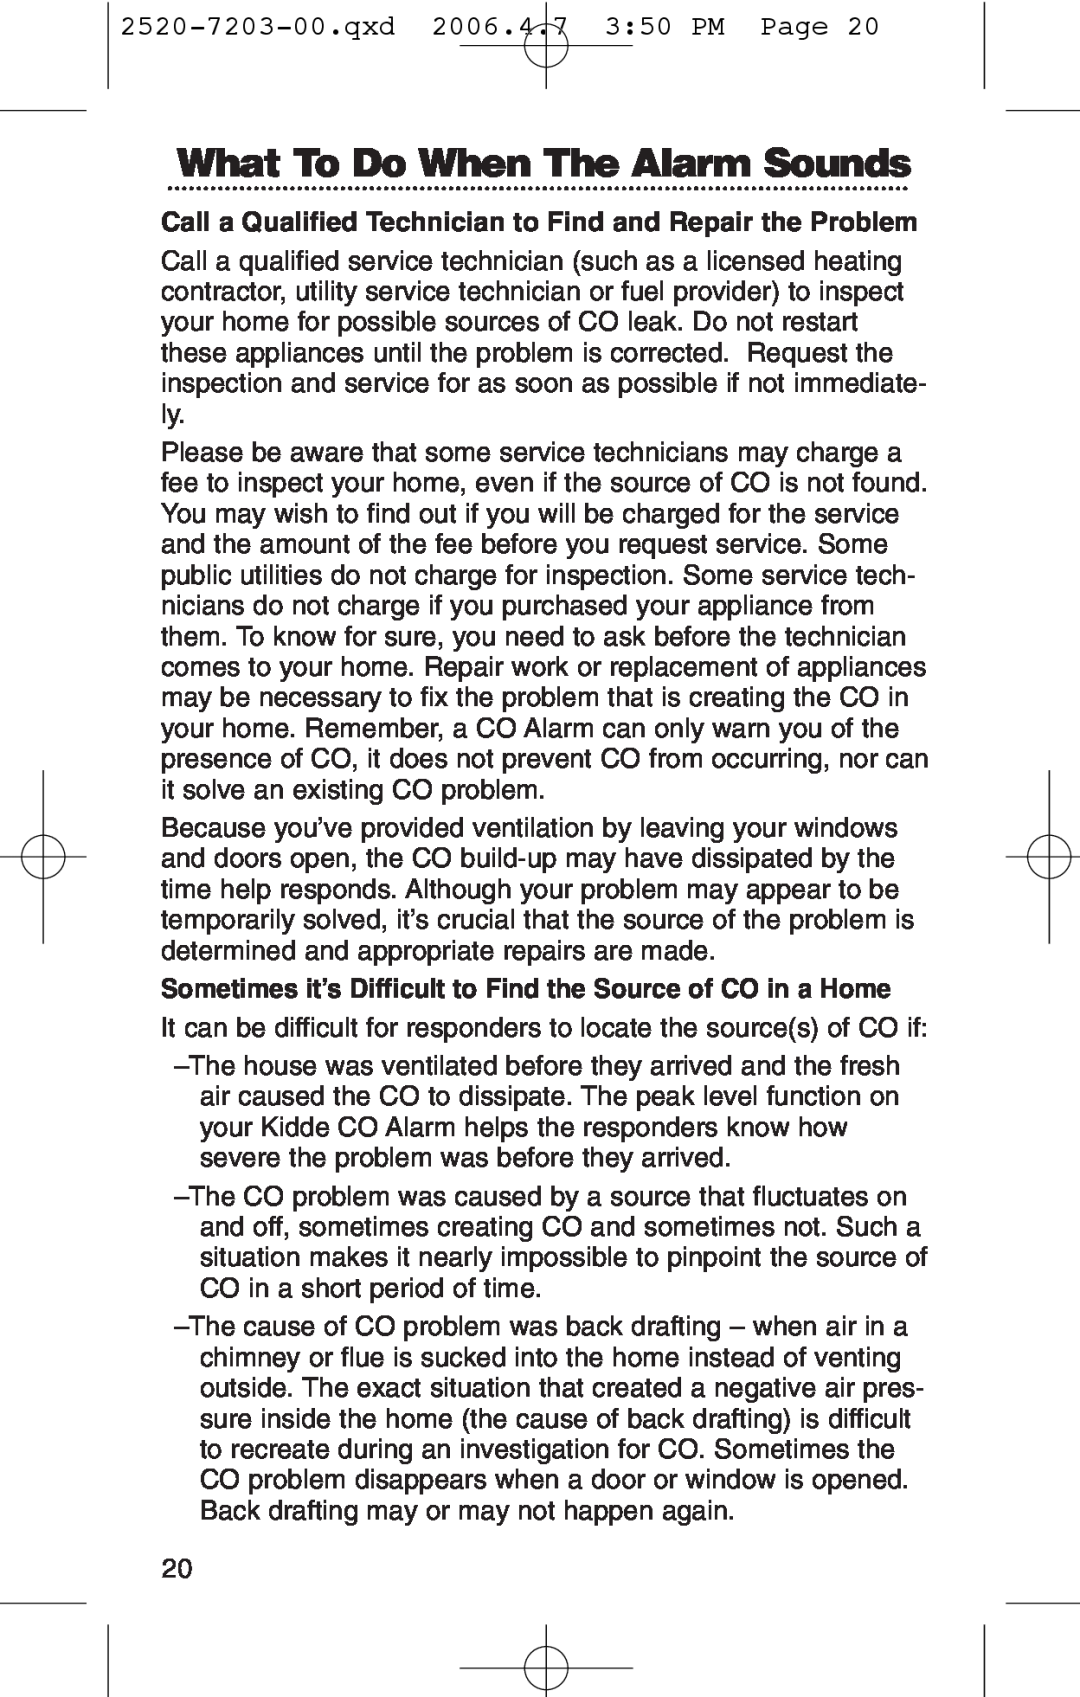 Kidde KN-COPD-3-UK manual What To Do When The Alarm Sounds, 2520-7203-00.qxd2006.4.7 3 50 PM Page 